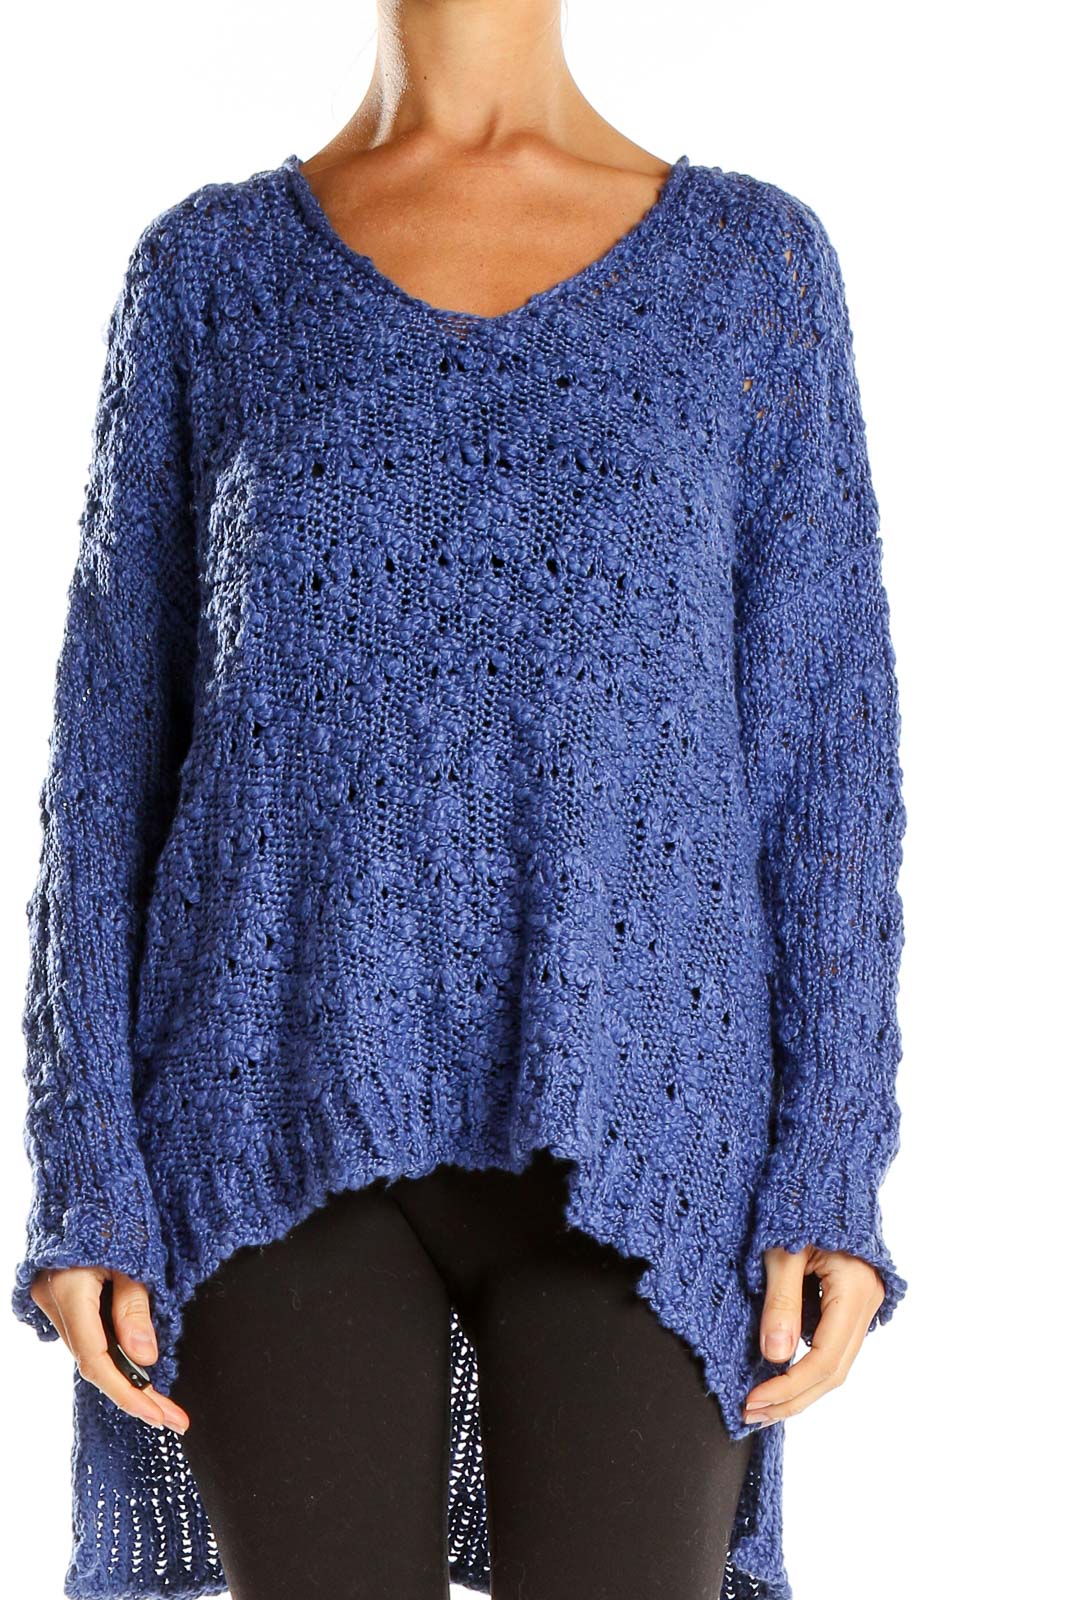 Blue Knit High Low Top Front